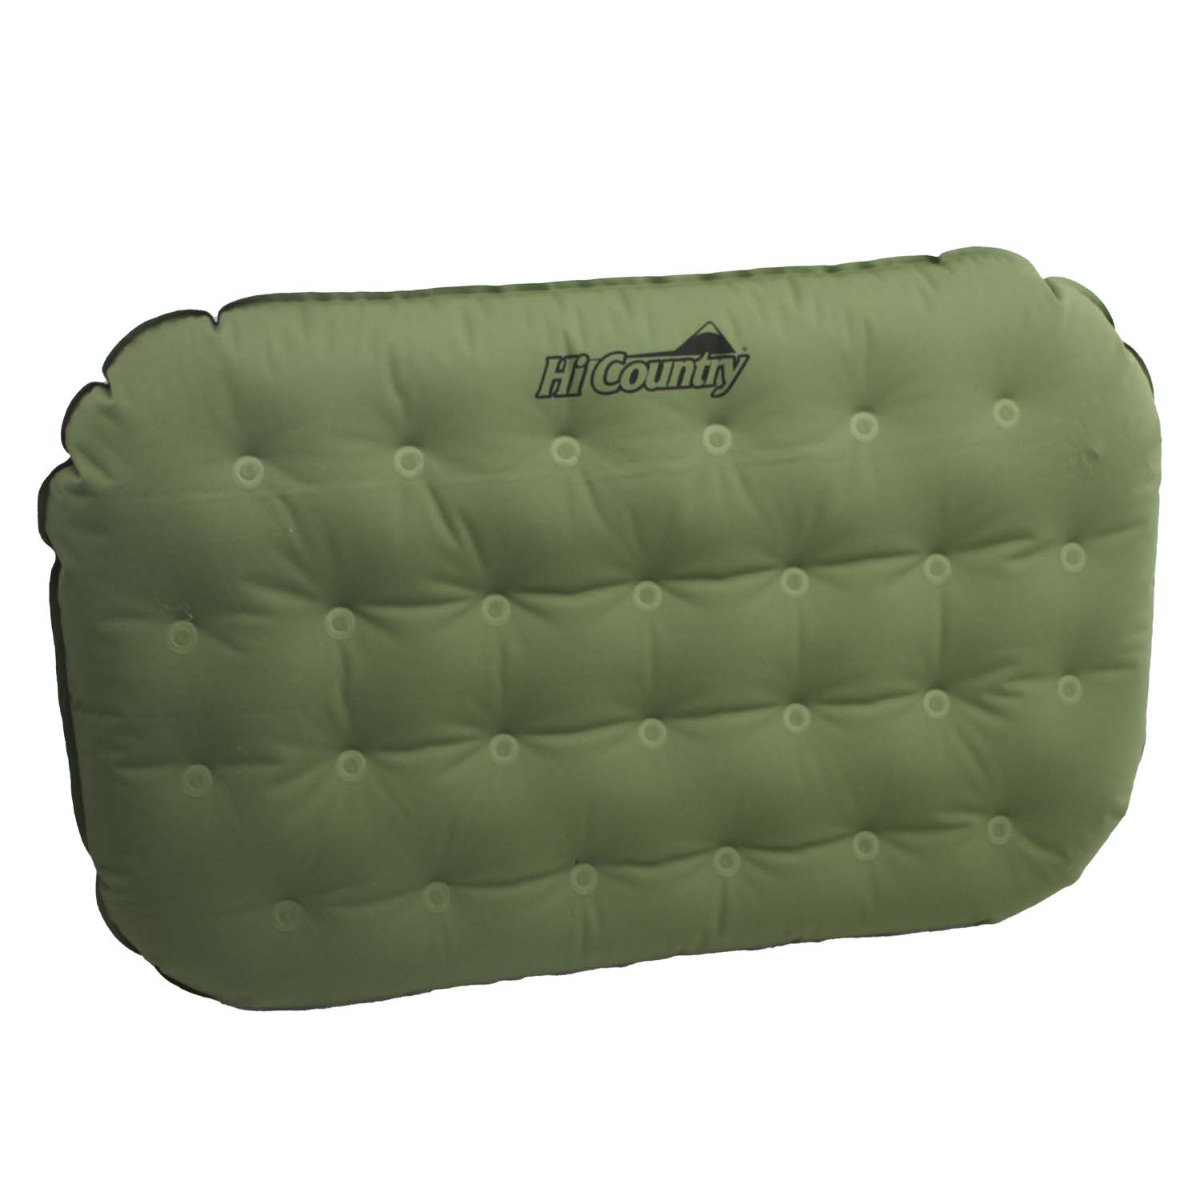 Hi Country Rugged Extreme Comfort Pillow 